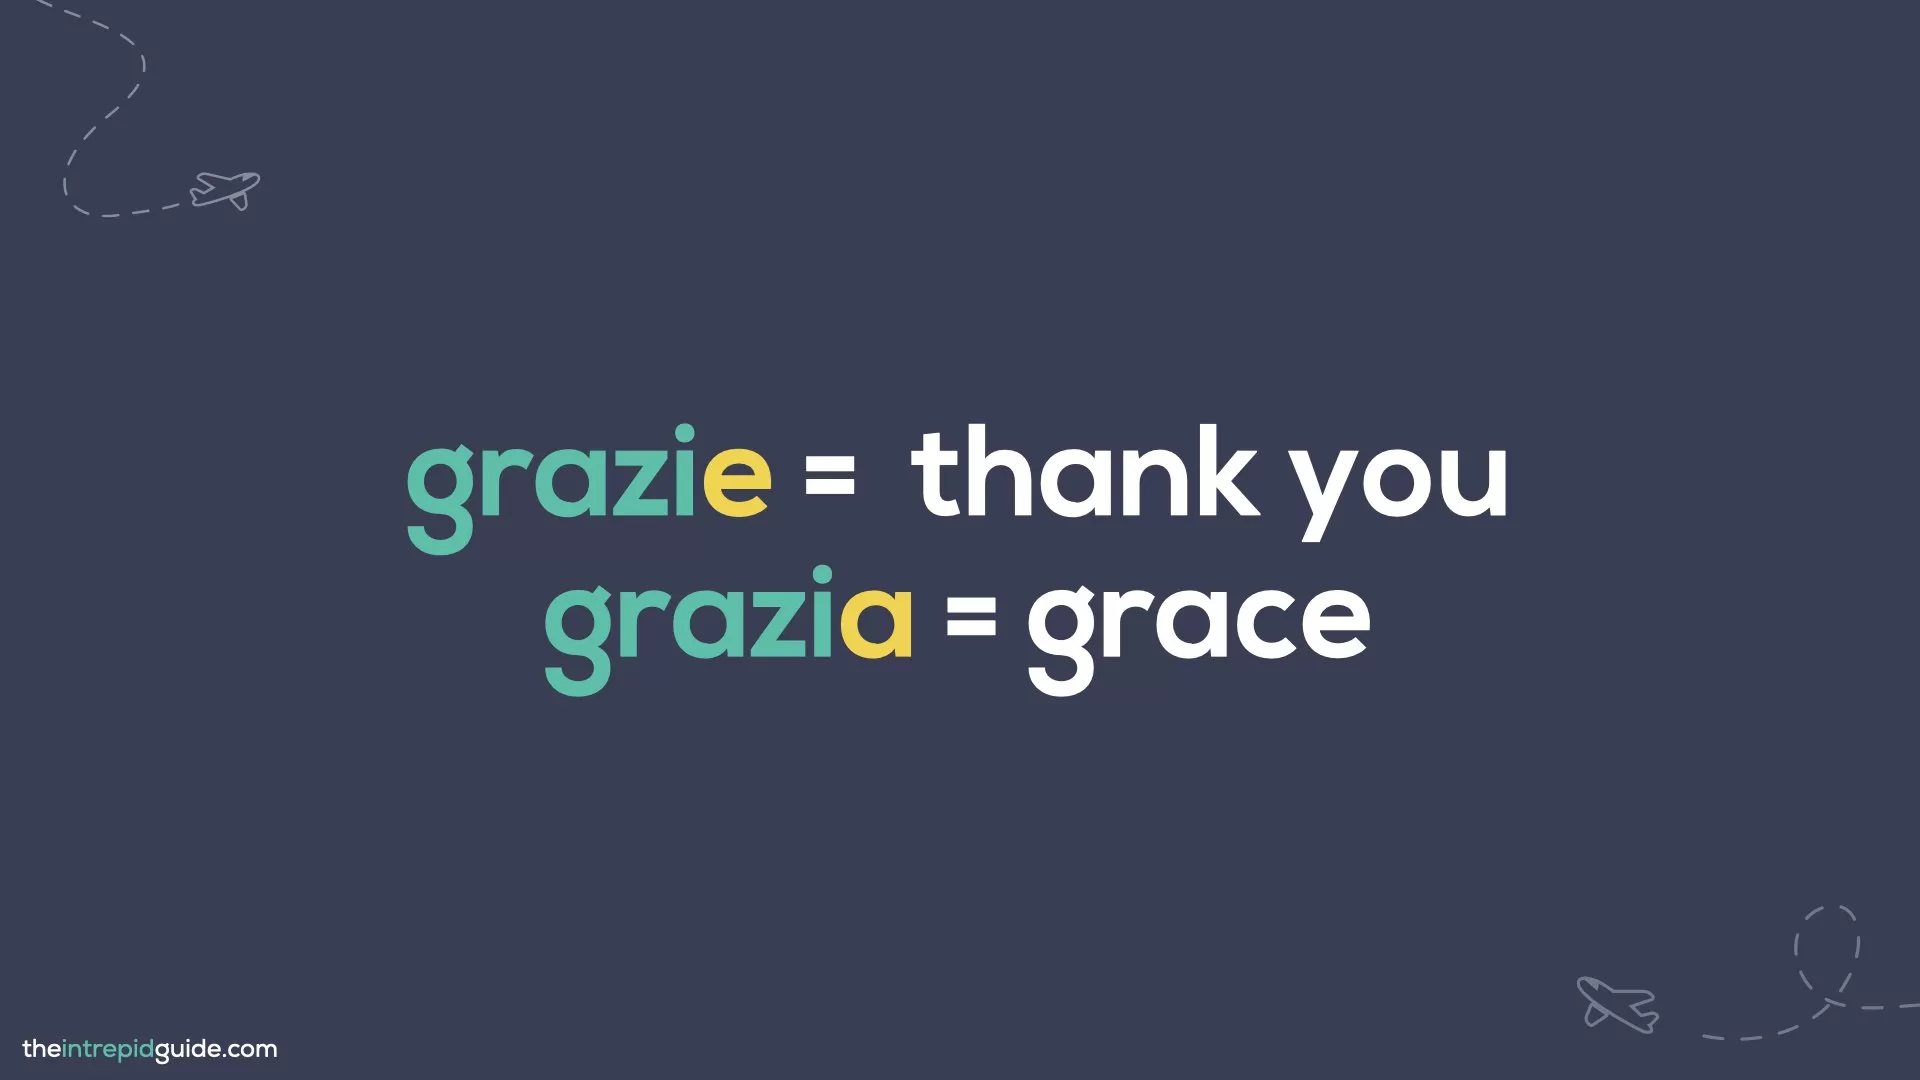 How to say thank you in Italian - grazie means thank you, grazia means grace